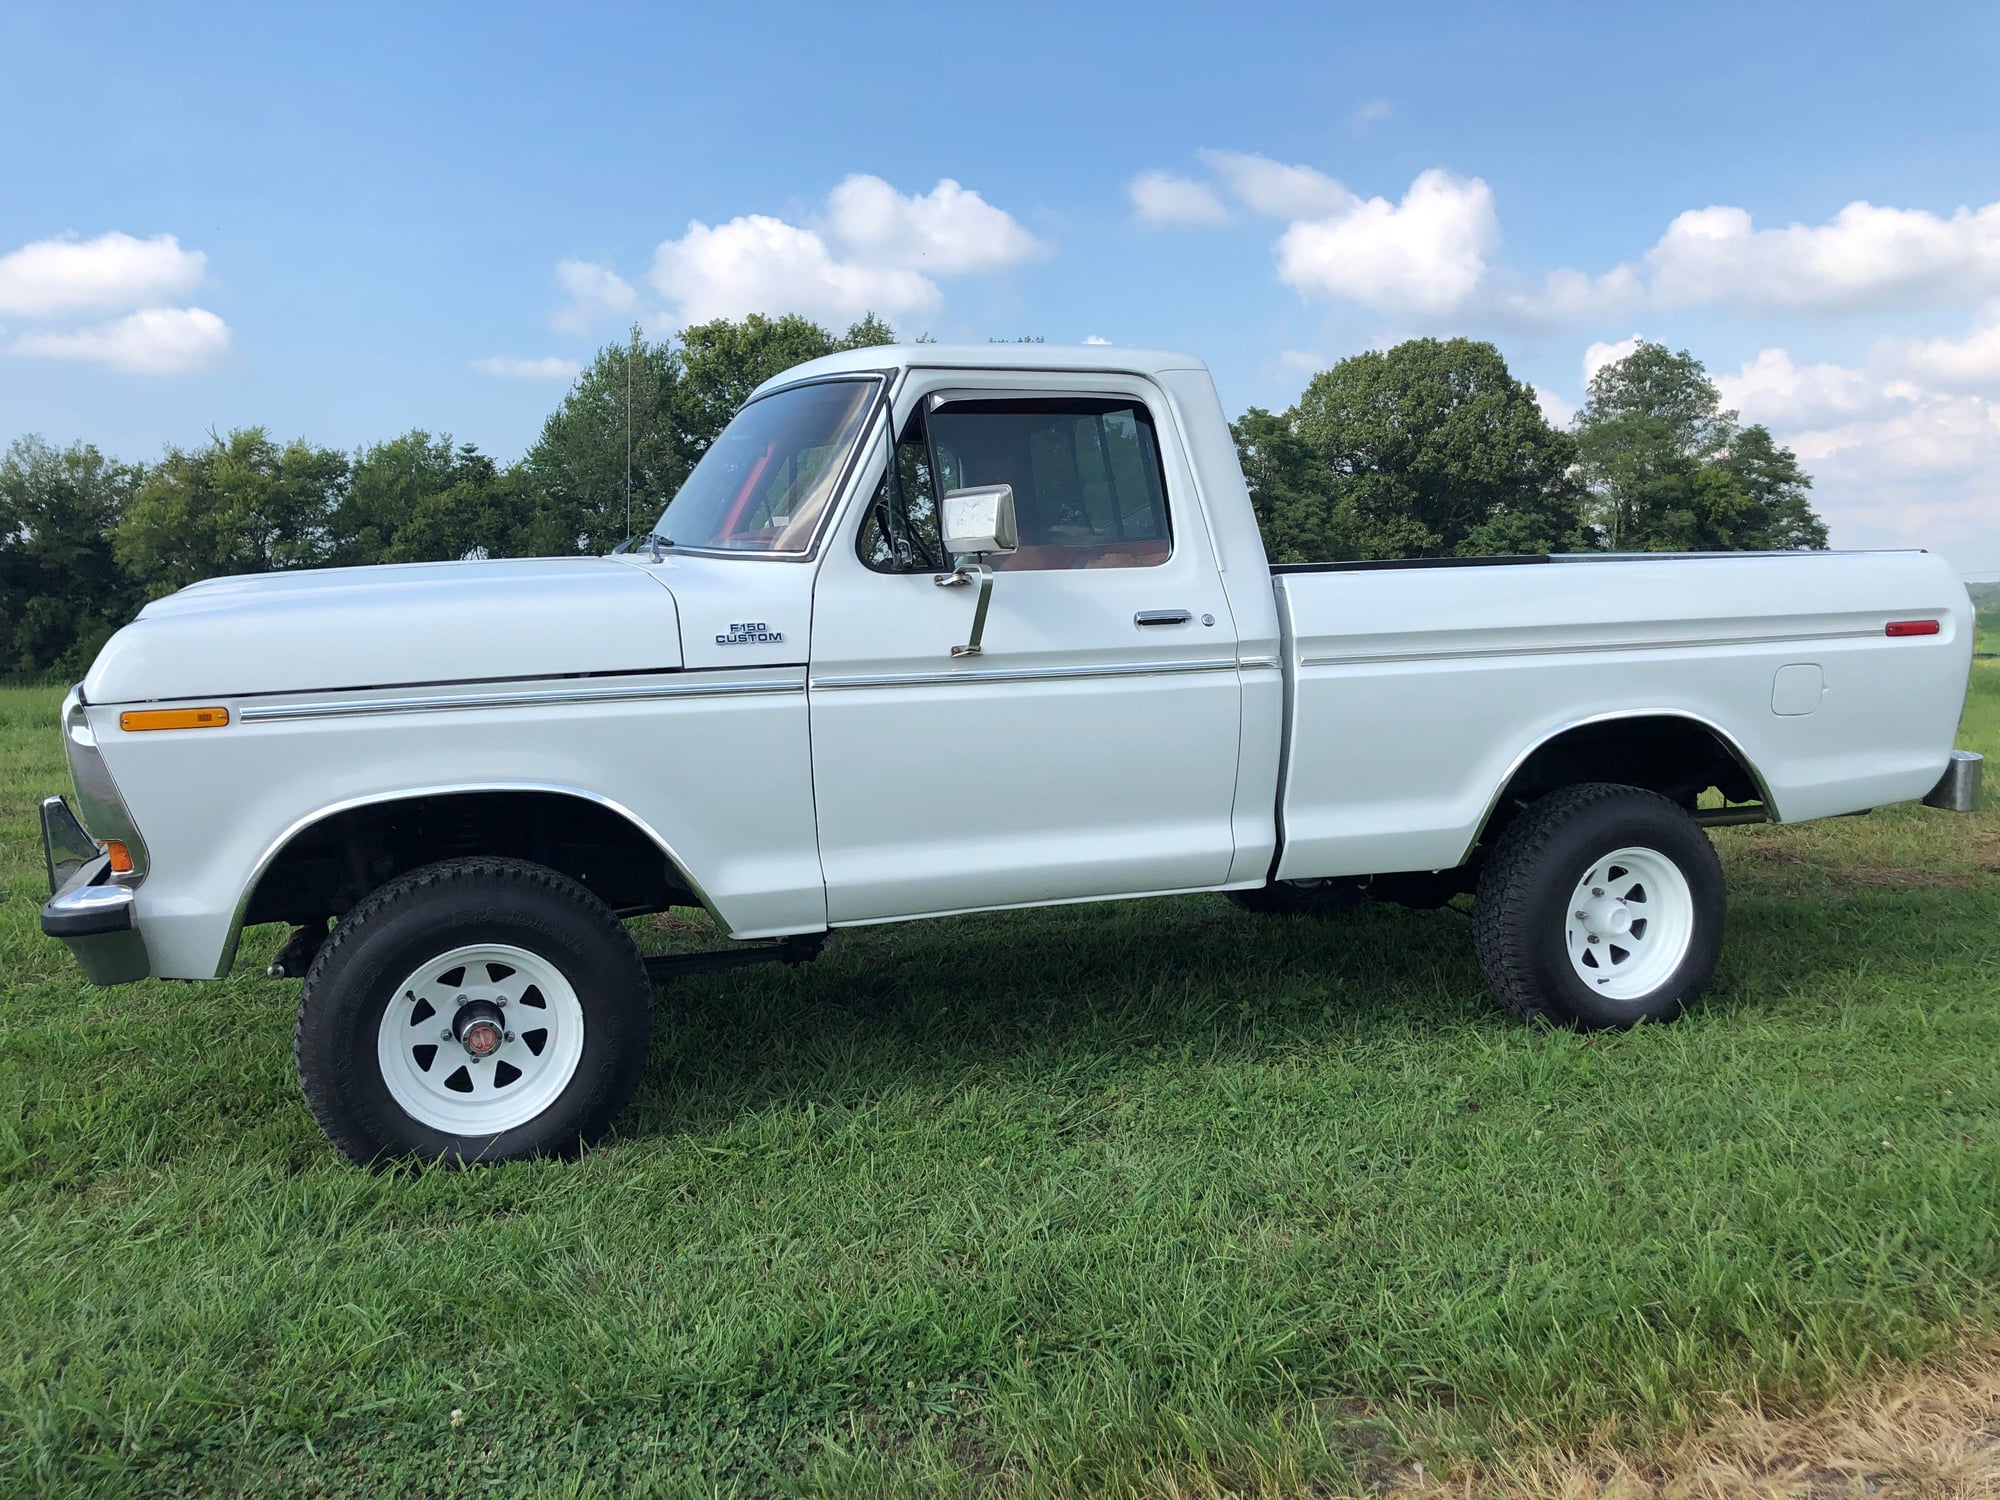 1978 Ford F-150 - 1978 Ford F-150 - Used - VIN f14hube4300 - 124,999 Miles - 8 cyl - 4WD - Manual - Truck - White - Gallatin, TN 37066, United States